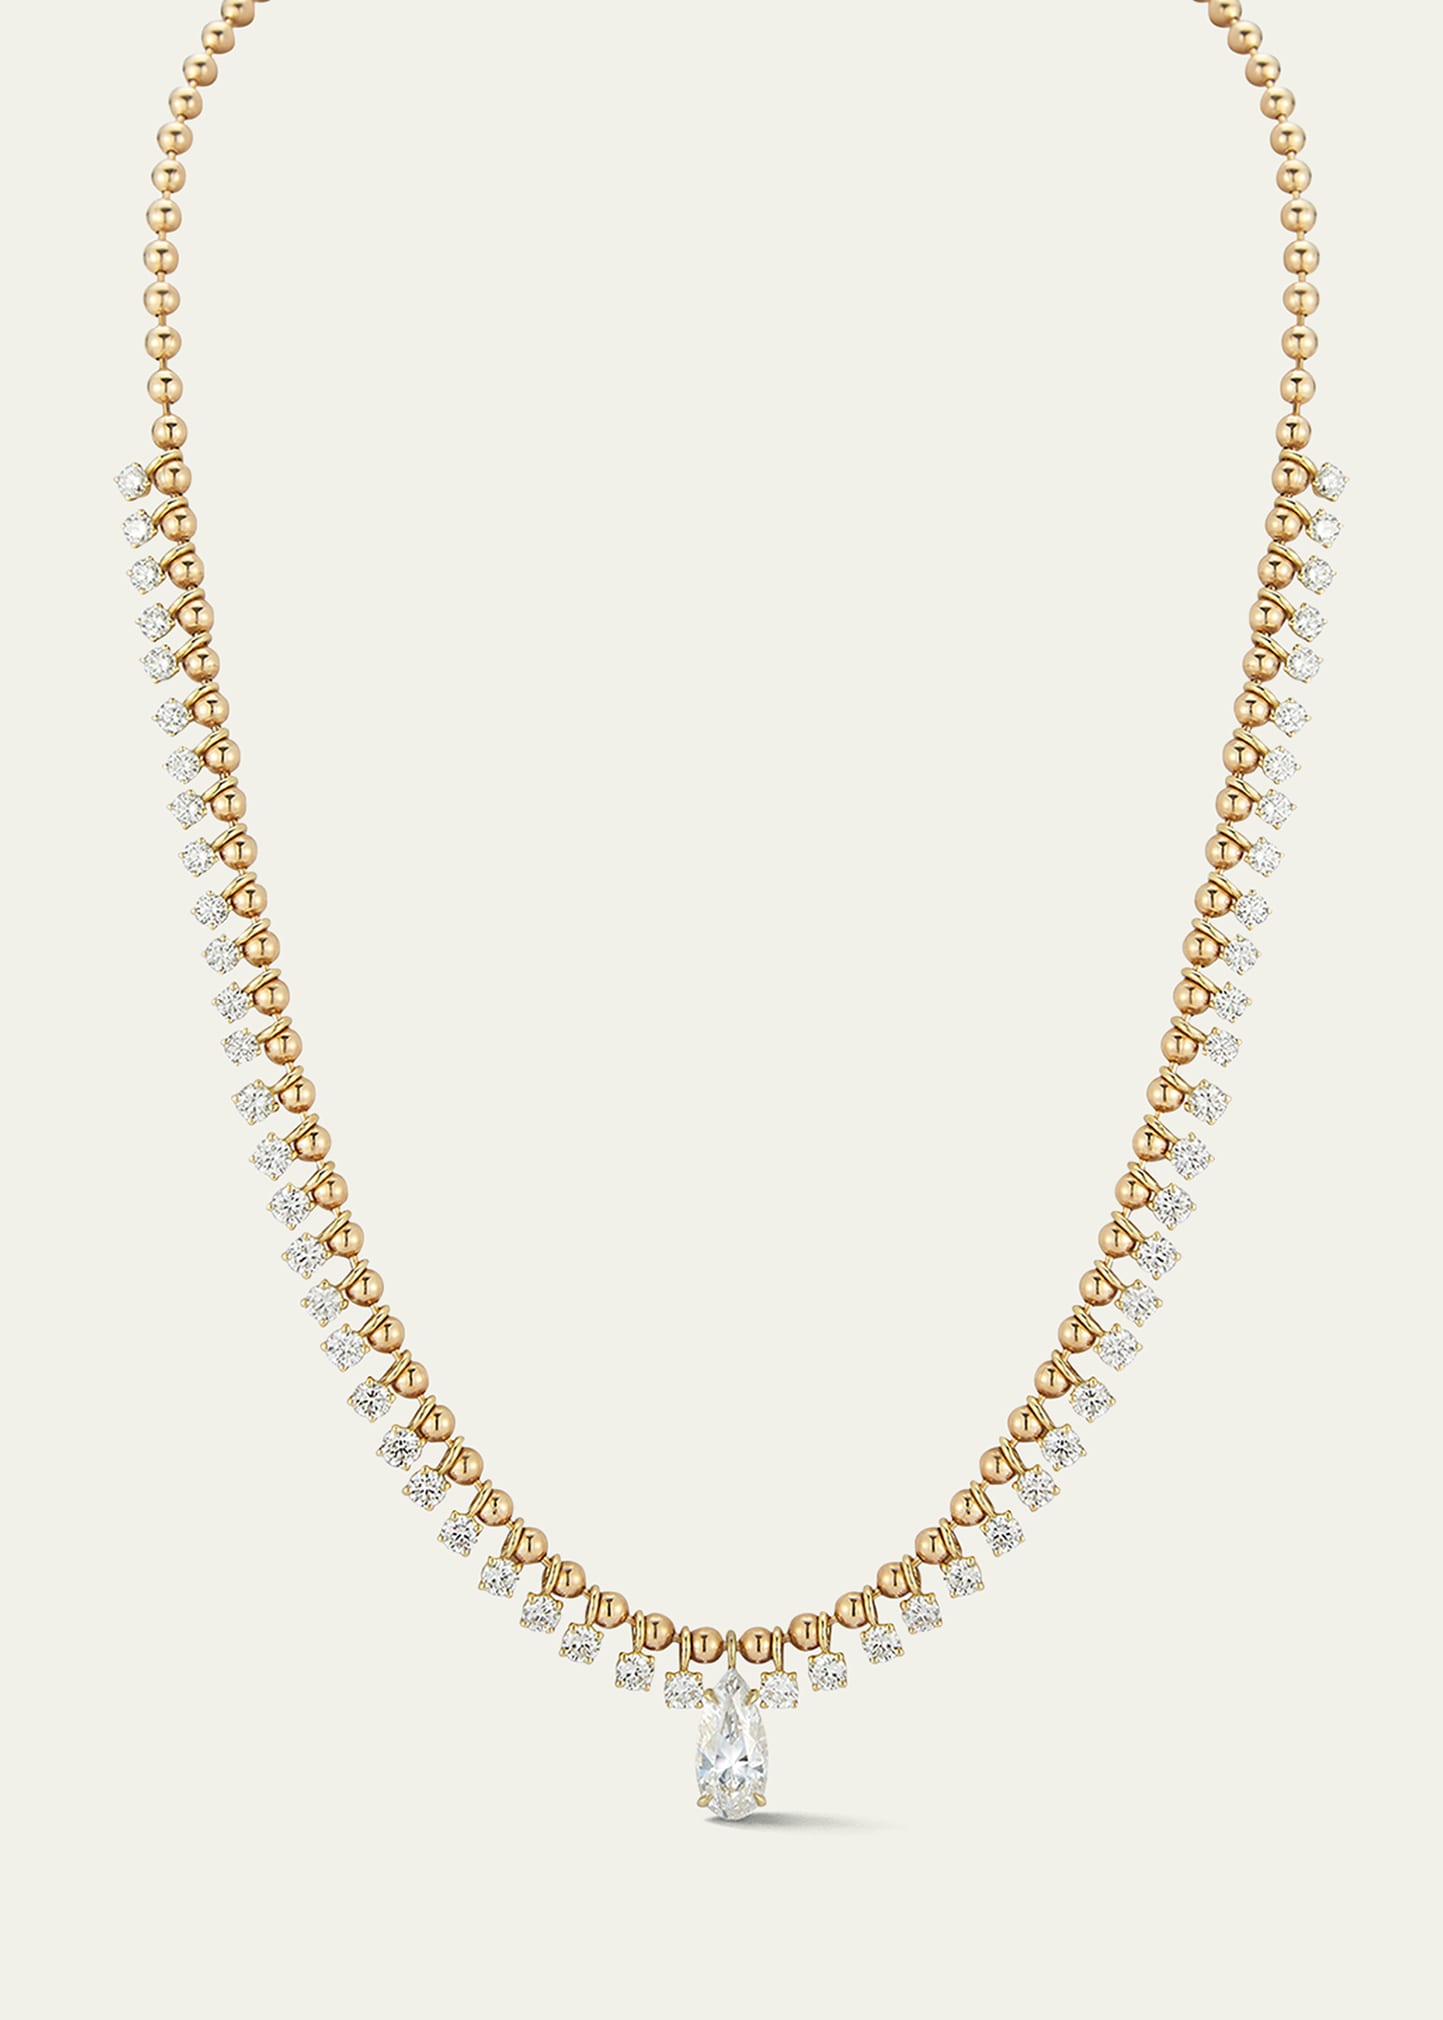 Jemma Wynne One-of-a-Kind Connexion Diamond Fringe Necklace With Diamond Pear Center